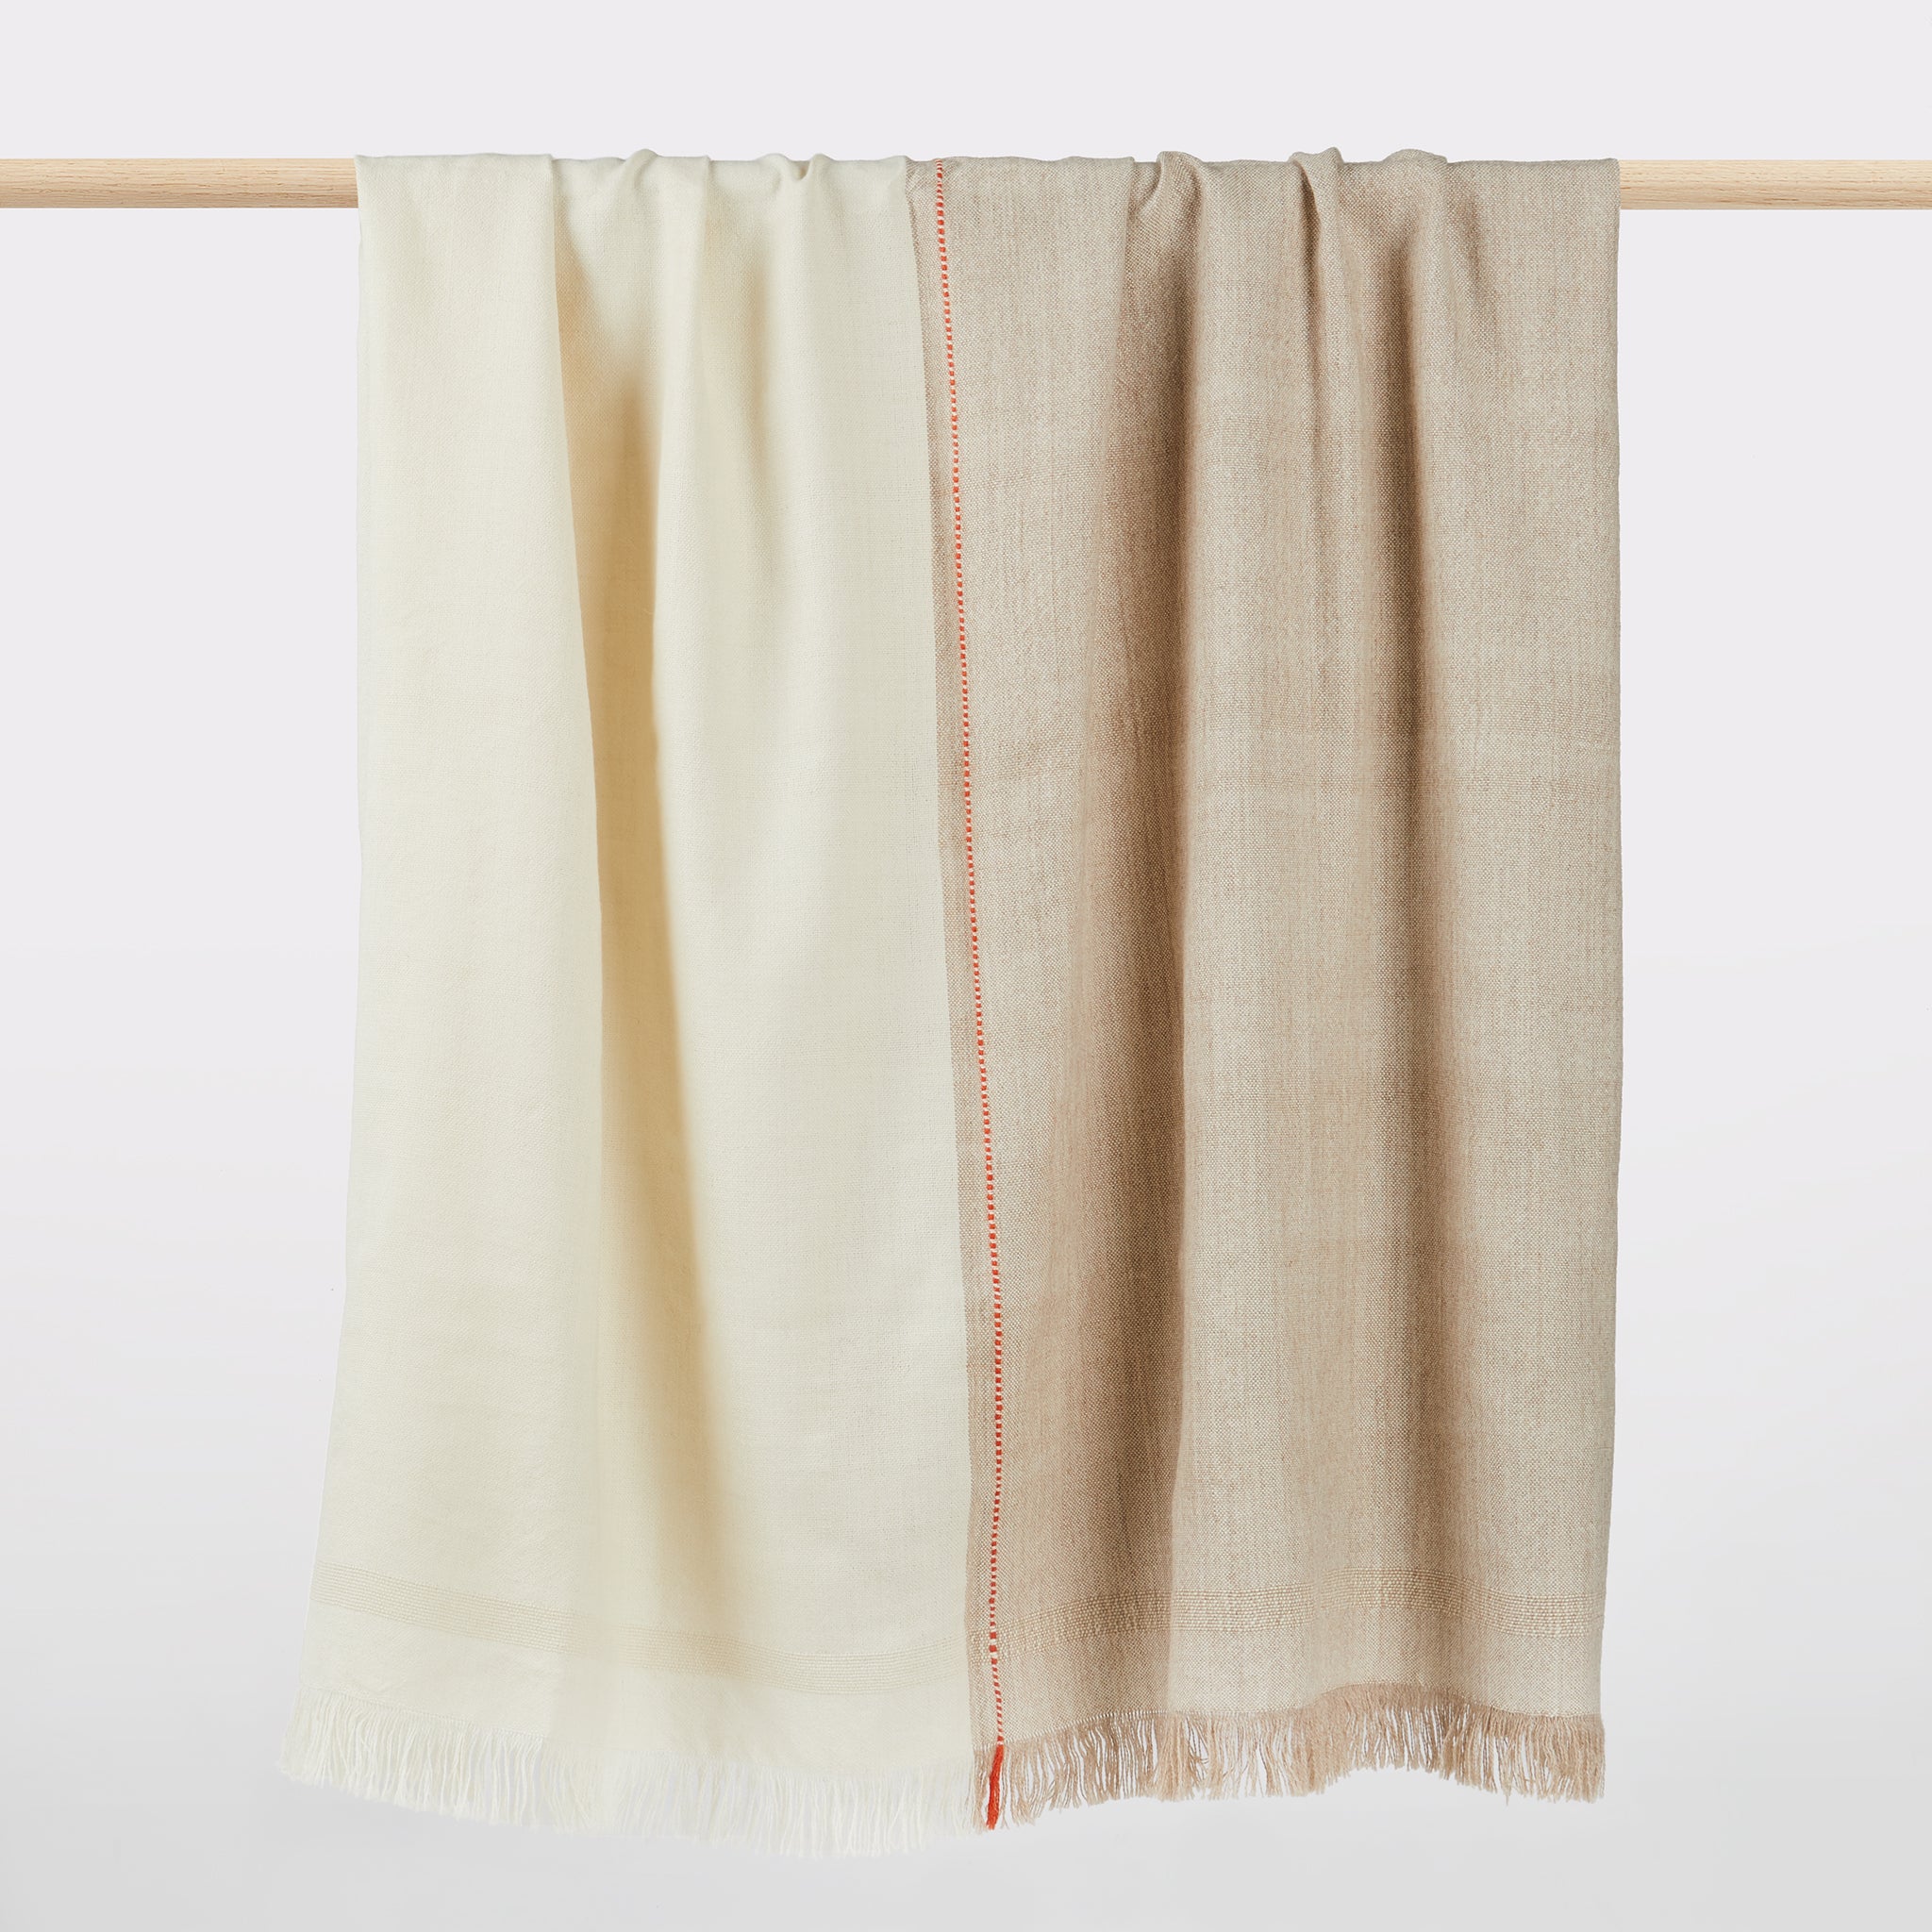 Stylish, handwoven BY NATIVE "Asiri" blanket made of soft baby alpaca in natural colours. With fringes, high relief stripes and a narrow contrast stripe as an eye-catcher.